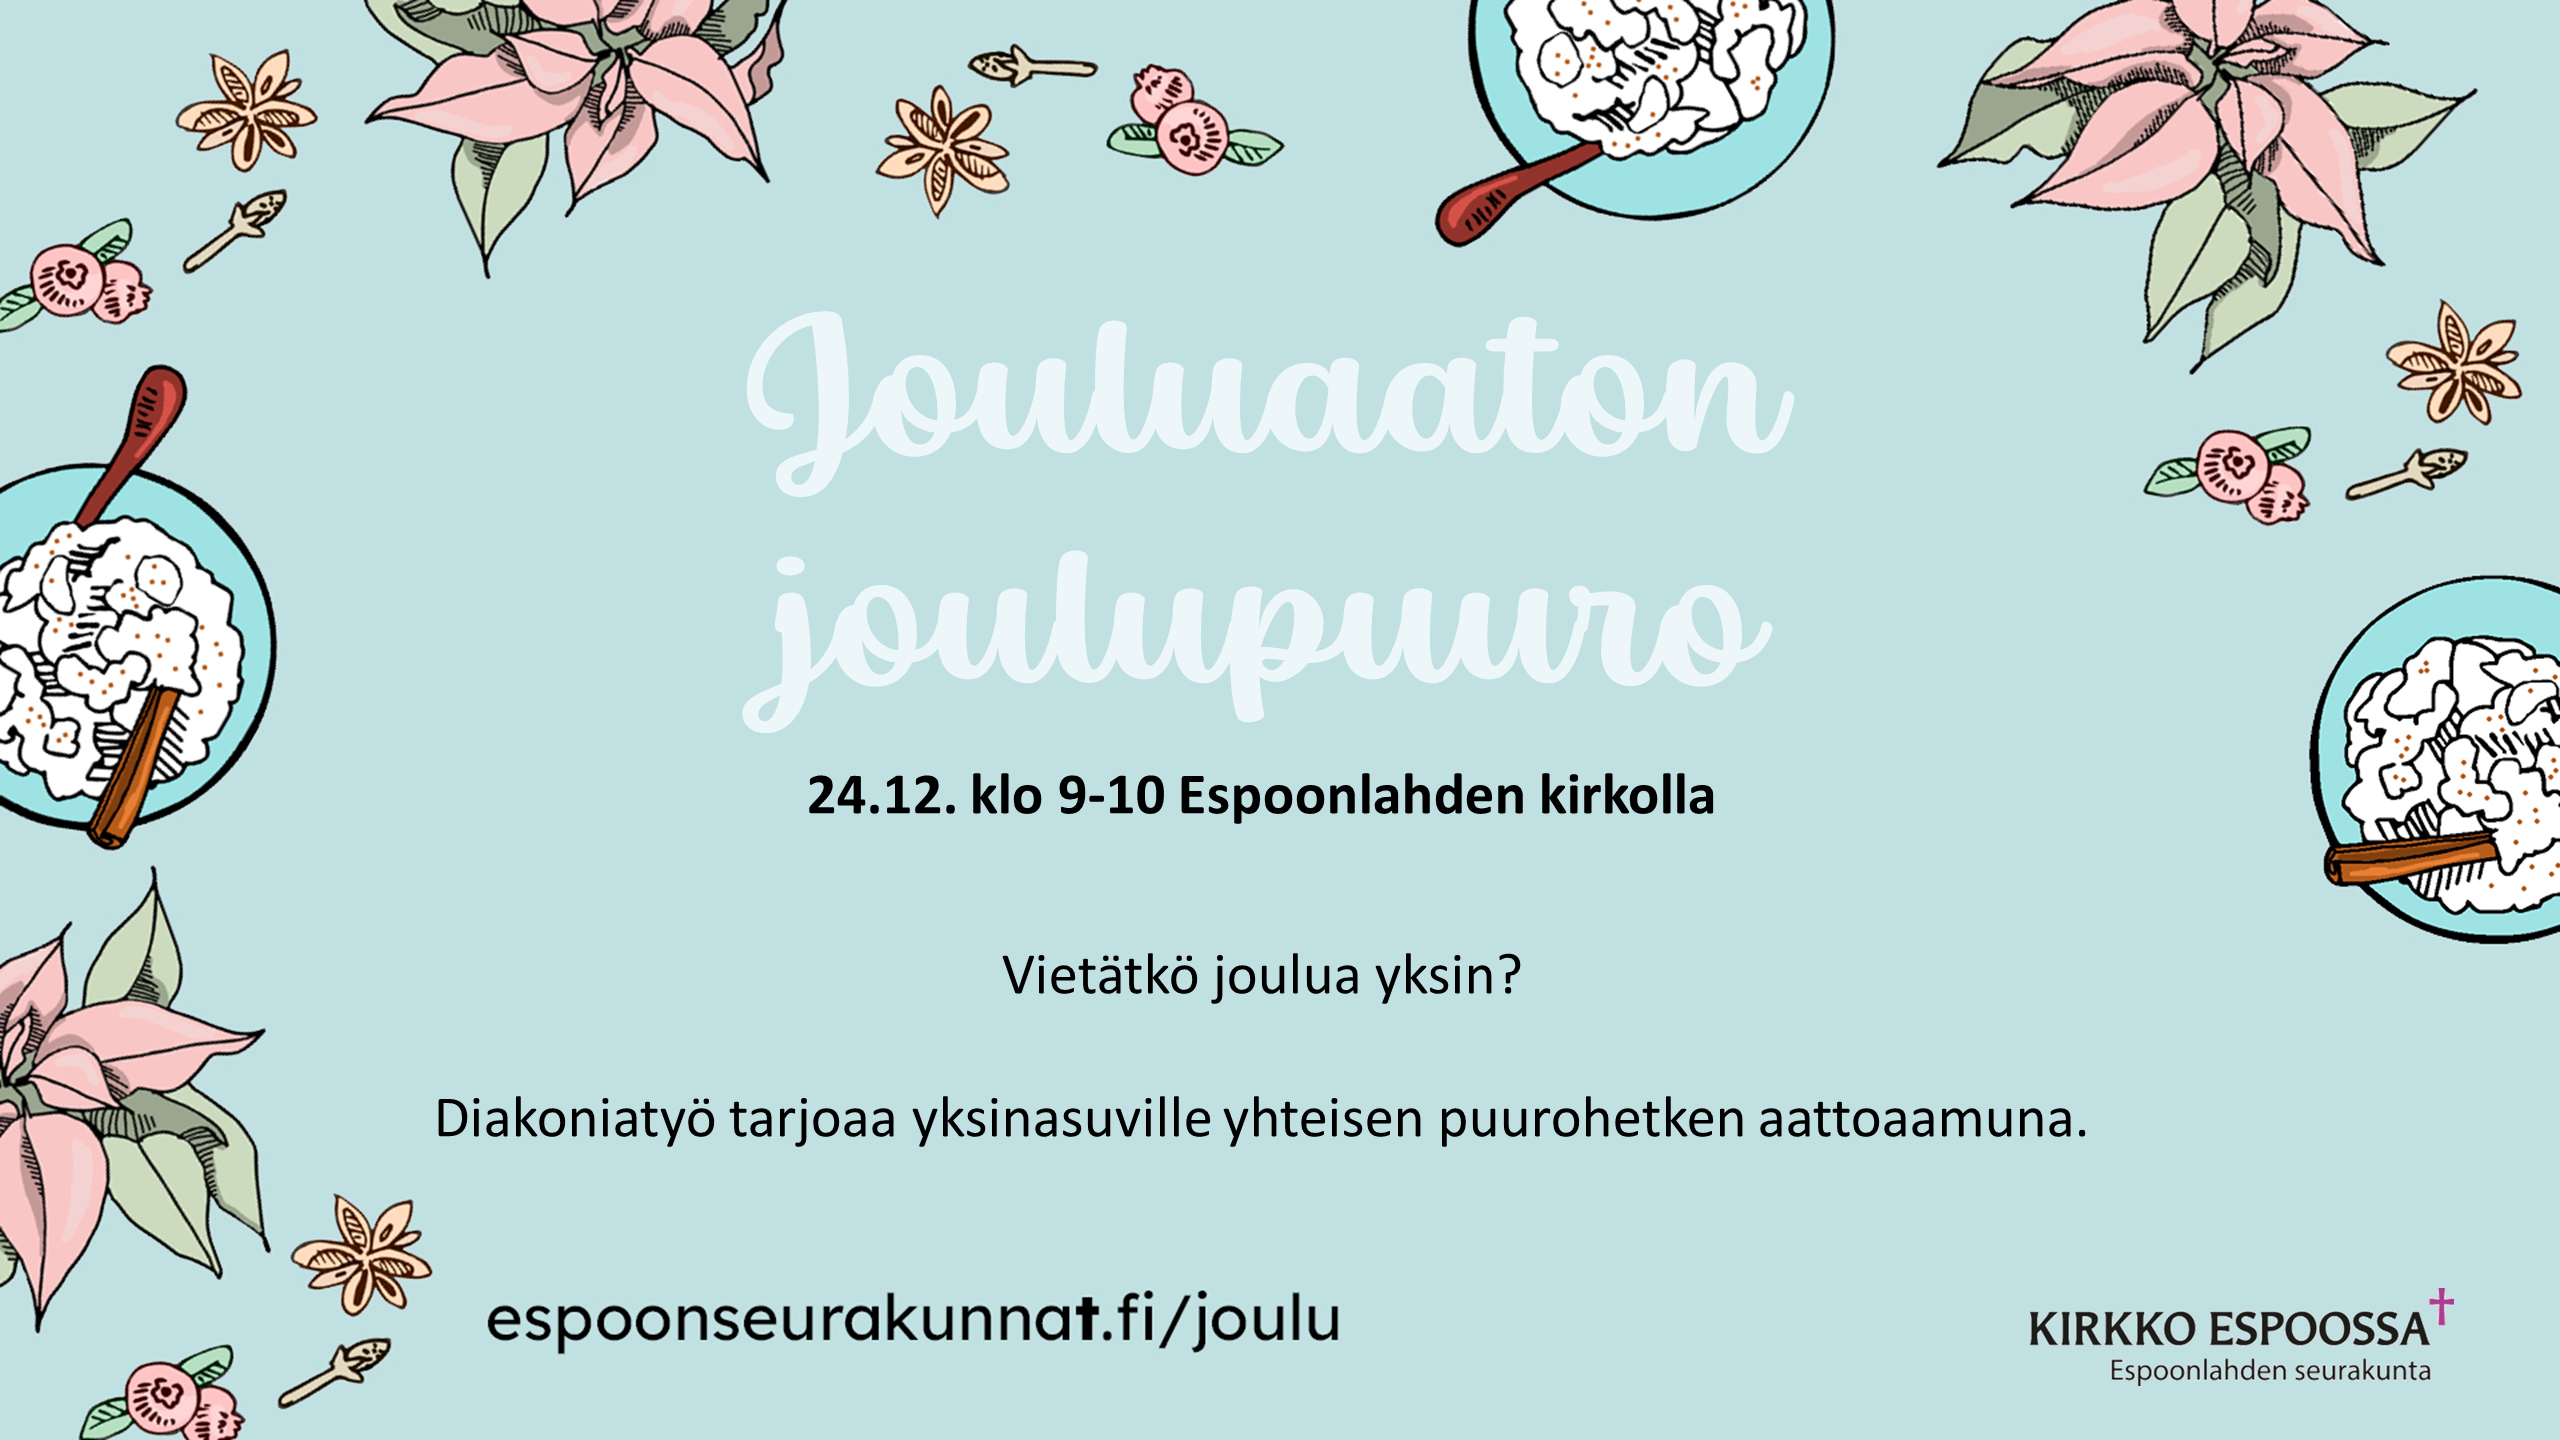 https://www.espoonseurakunnat.fi/documents/5402875/0/Jouluaaton+joulupuuro+-+Screen+%281%29.png/a5ad9f83-ff06-ced5-75c7-414675d6bd37?t=1700222656644